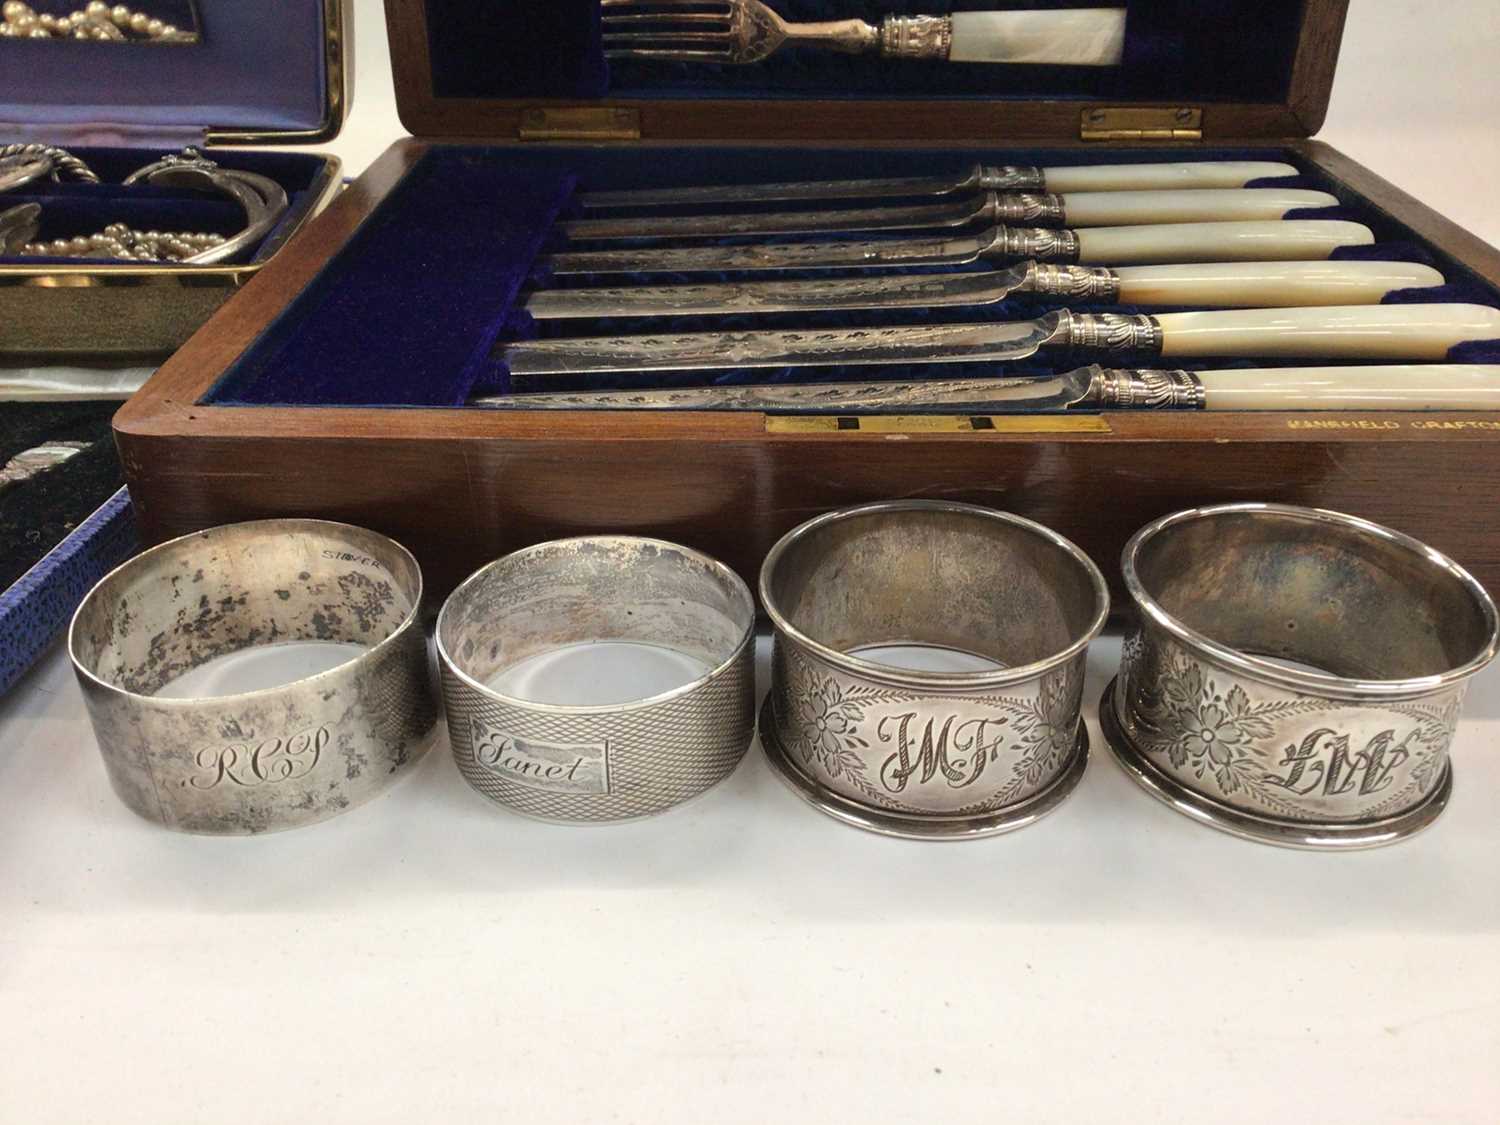 Four silver napkin rings, jewellery, plated souvenir spoons and a mother of pearl handled plated kni - Image 2 of 5